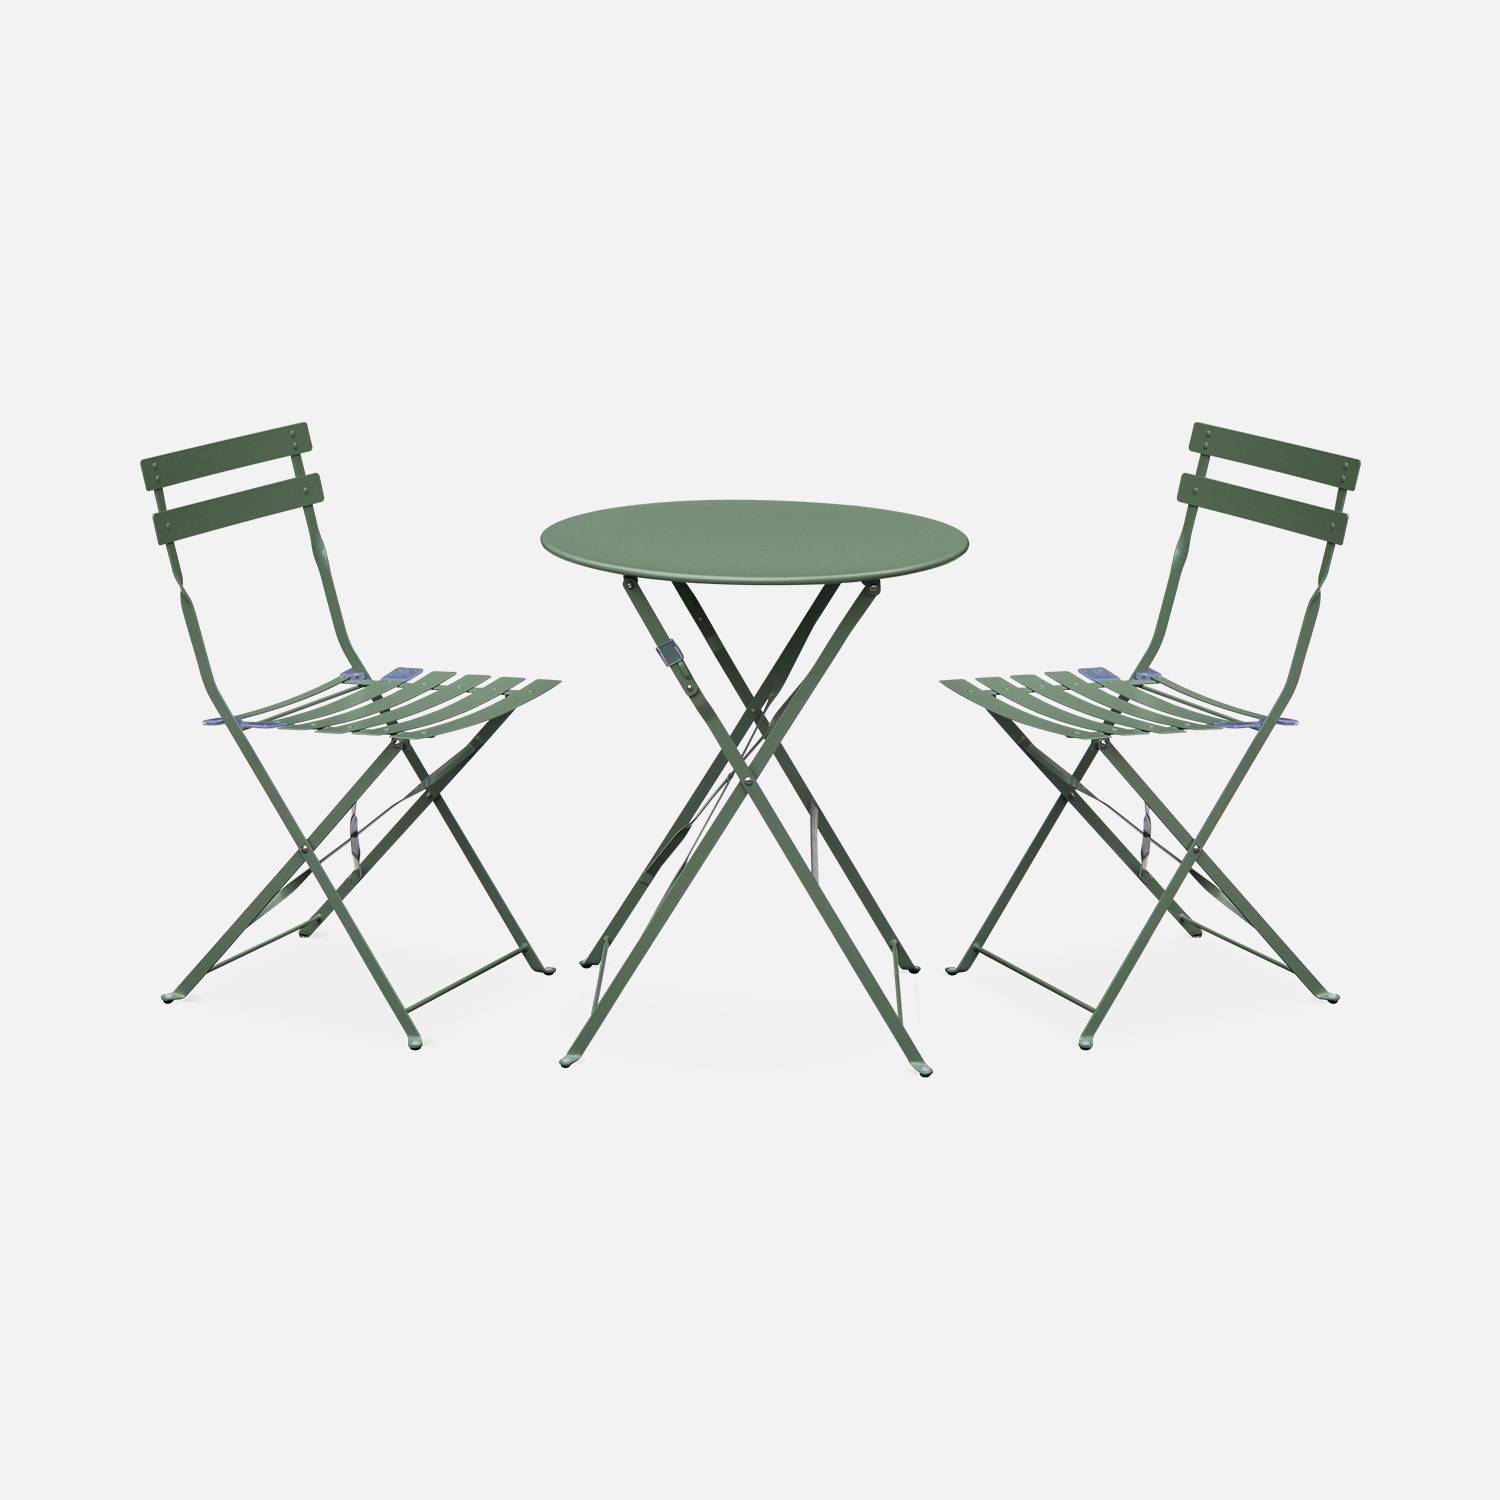 2-seater foldable thermo-lacquered steel bistro garden table with chairs, Ø60cm - Emilia - Sage green Photo2